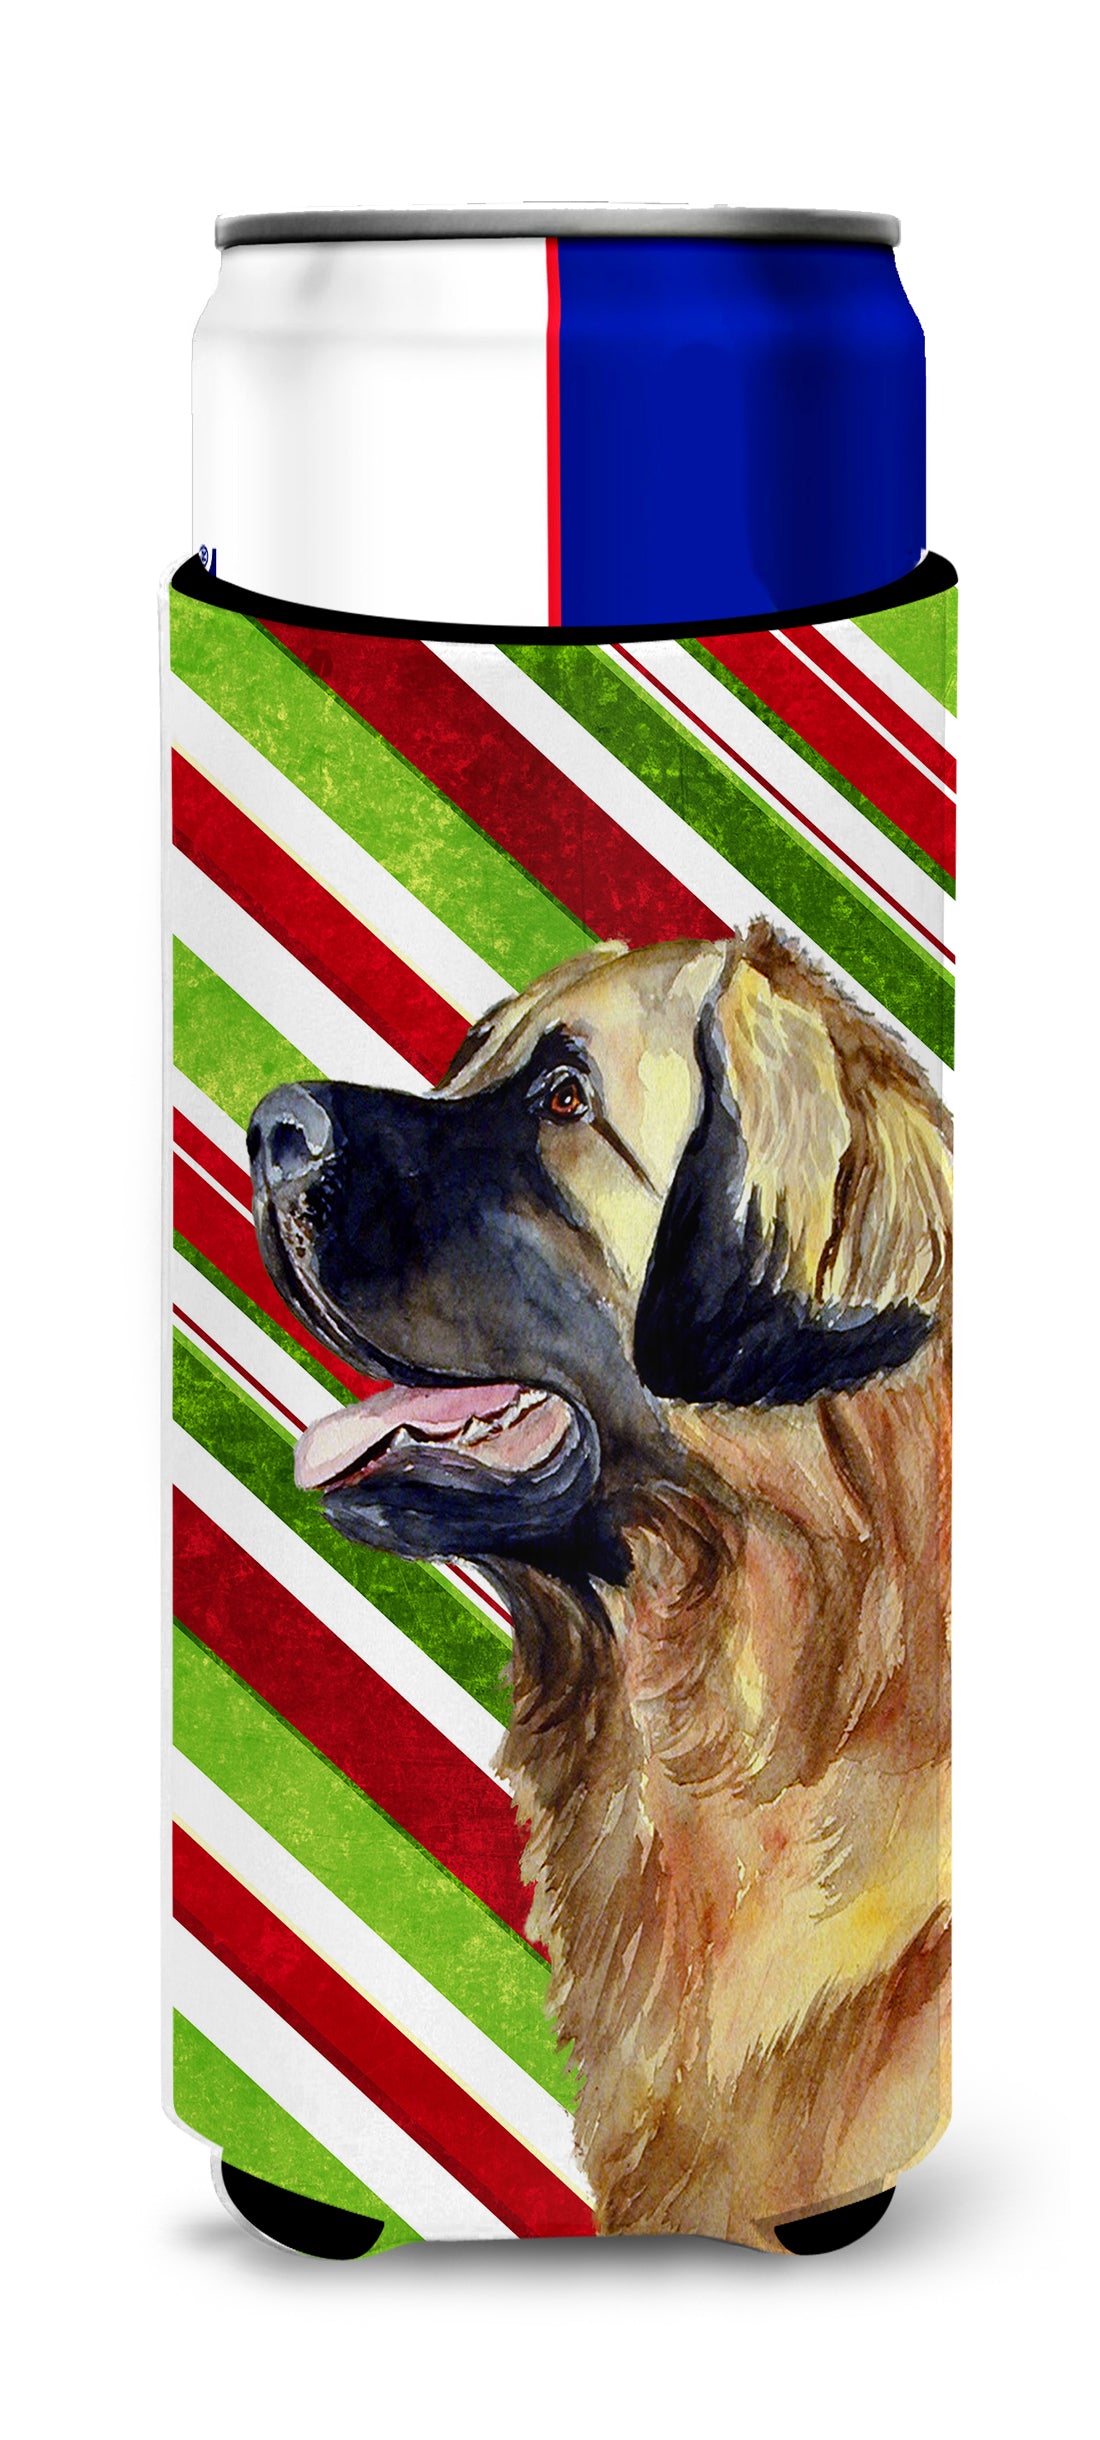 Leonberger Candy Cane Holiday Christmas Ultra Beverage Insulators for slim cans LH9258MUK